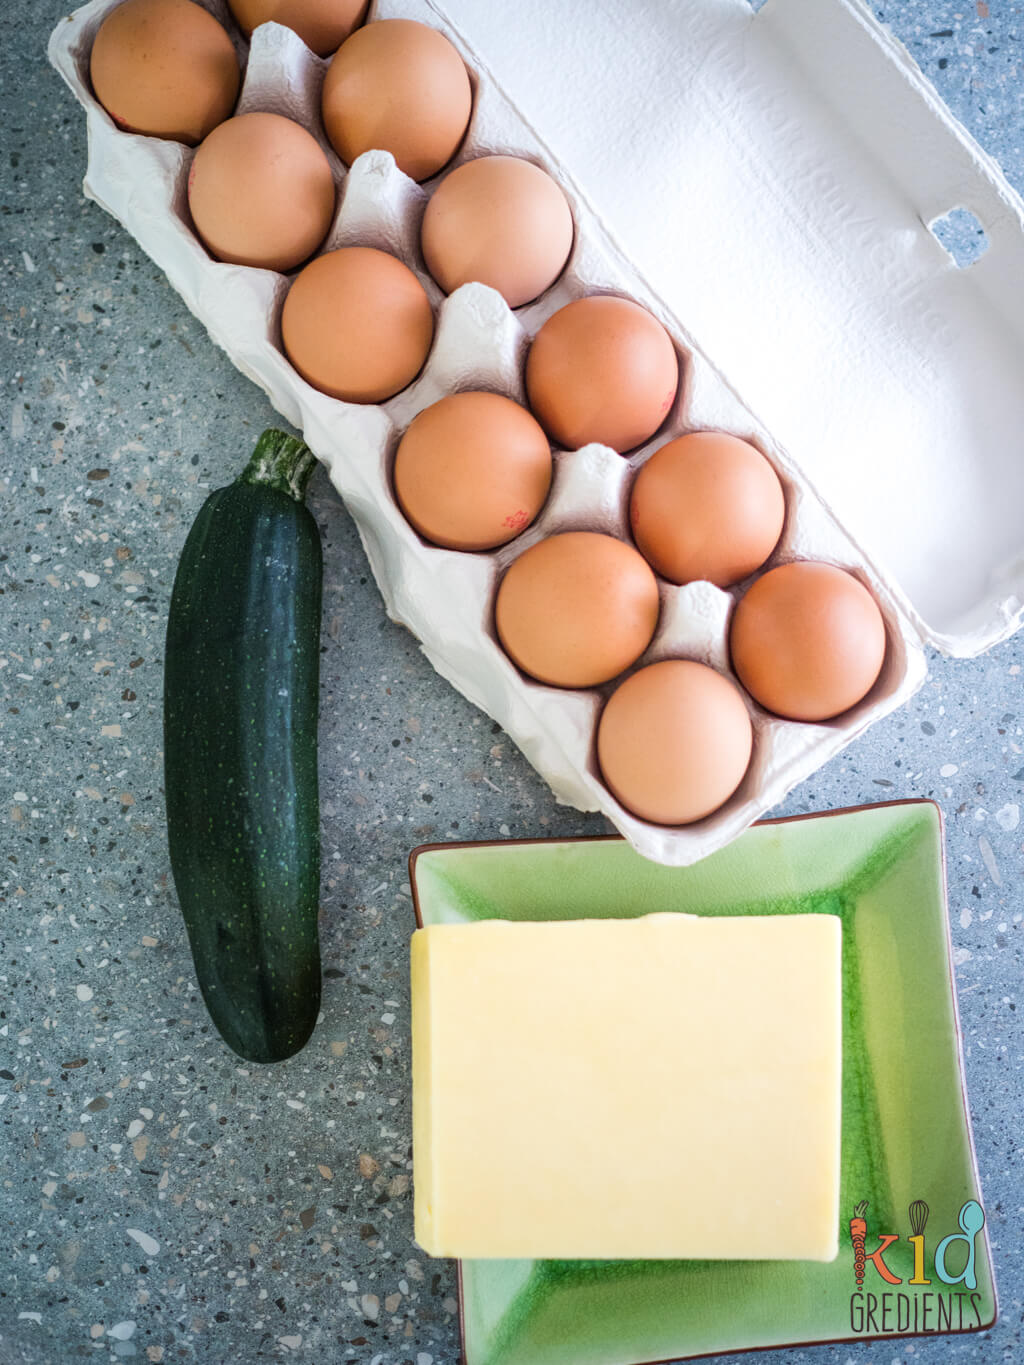 ingredients: eggs, zucchini and cheddar cheese